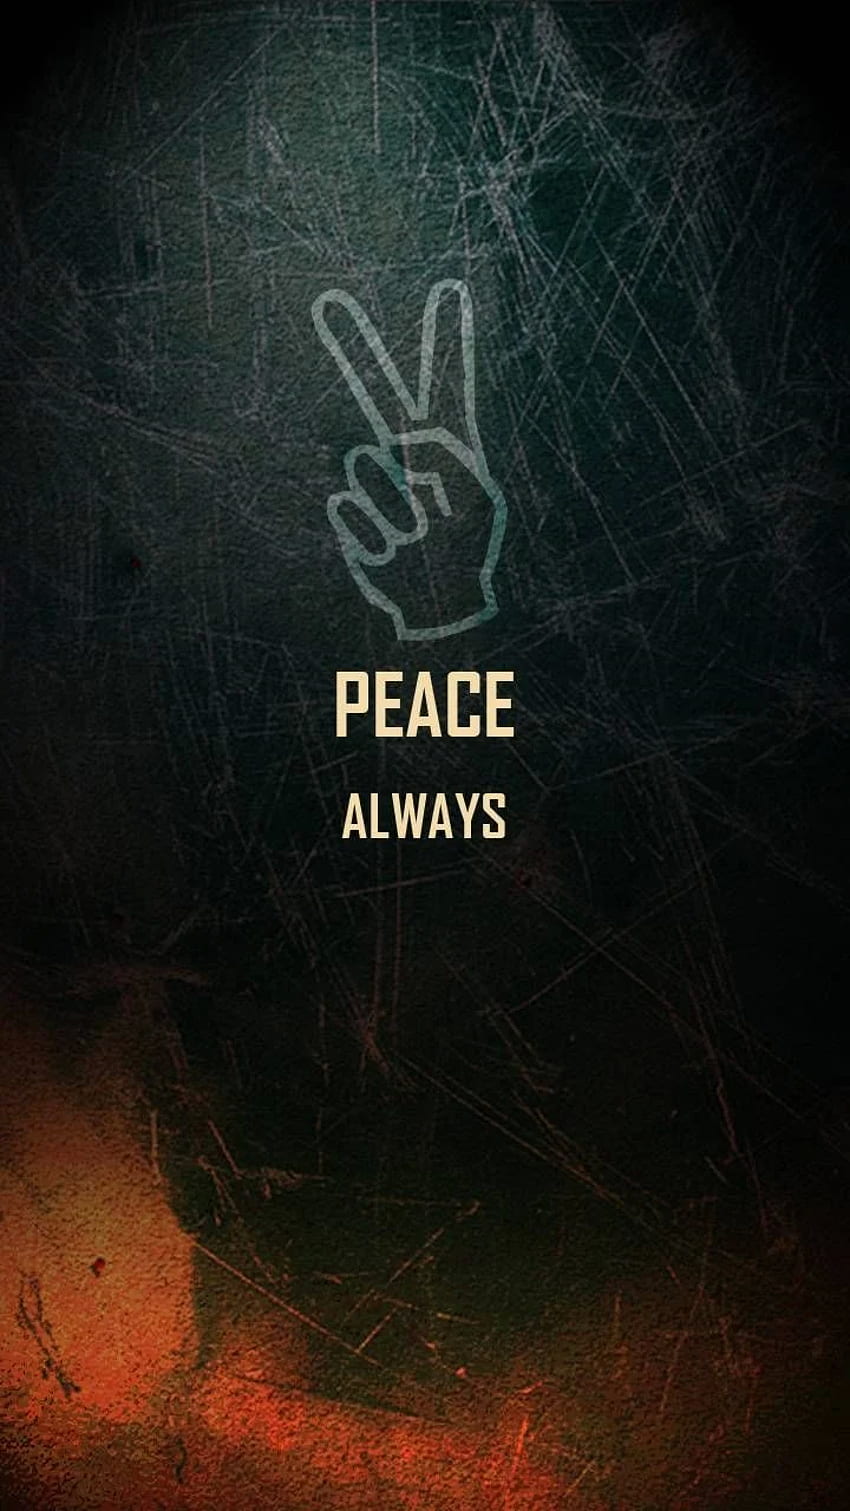 Peace by Sabb97 - a2 now. Browse millions of. Phone for men, Cool for phones, Love background HD phone wallpaper